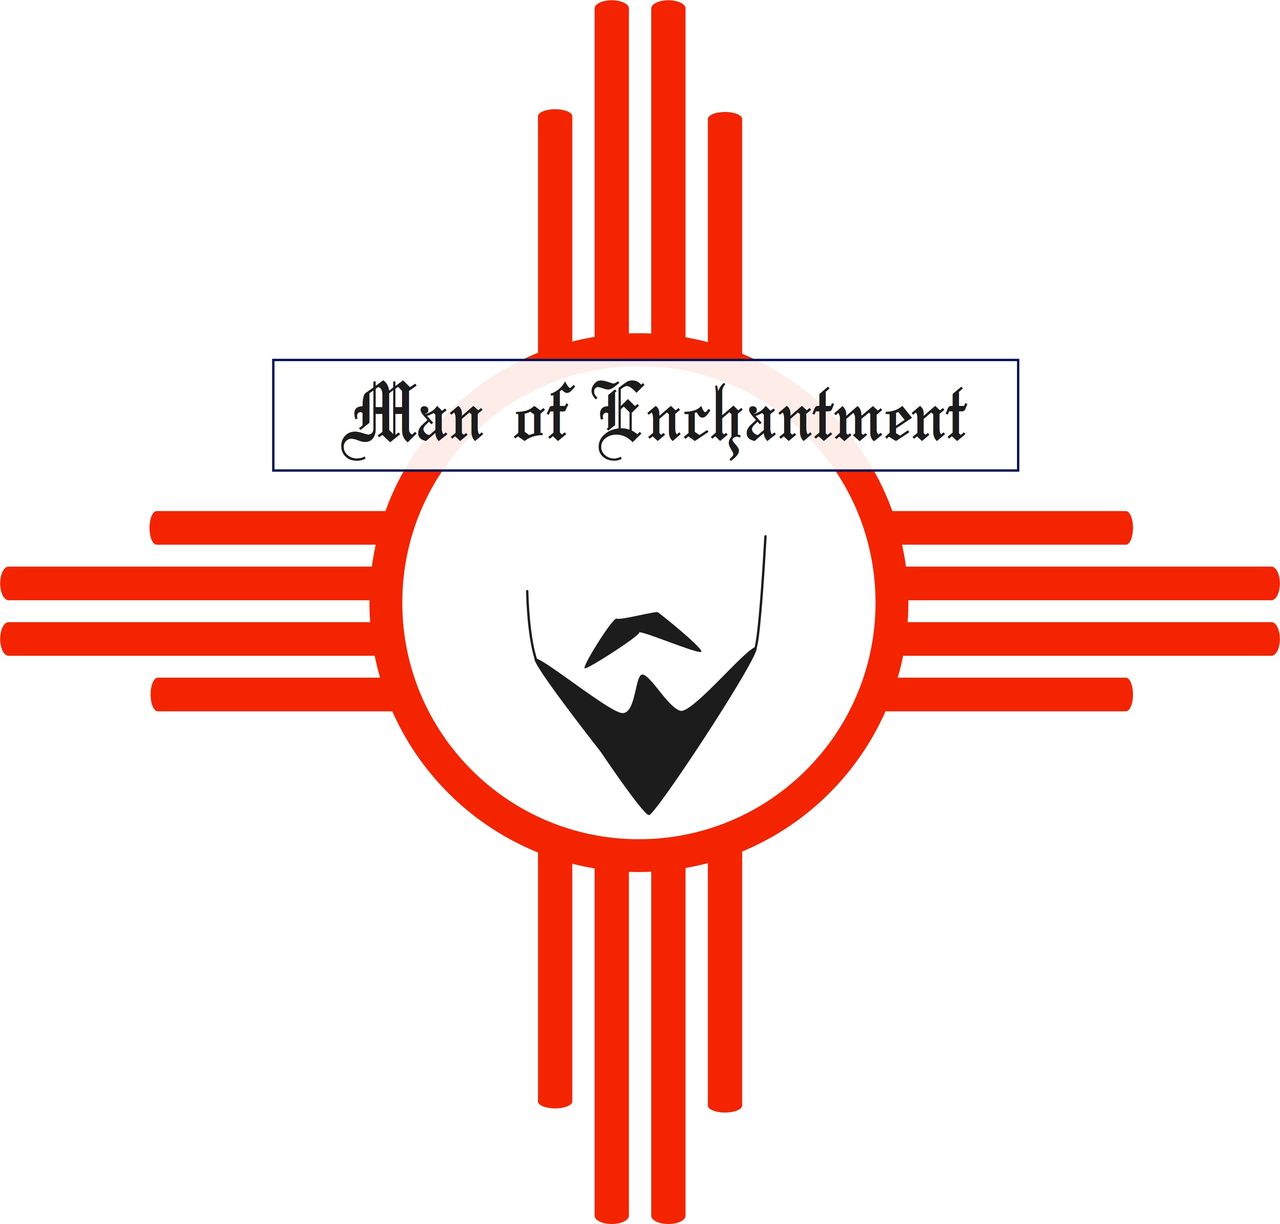 the Man of Enchantment's Newsletter